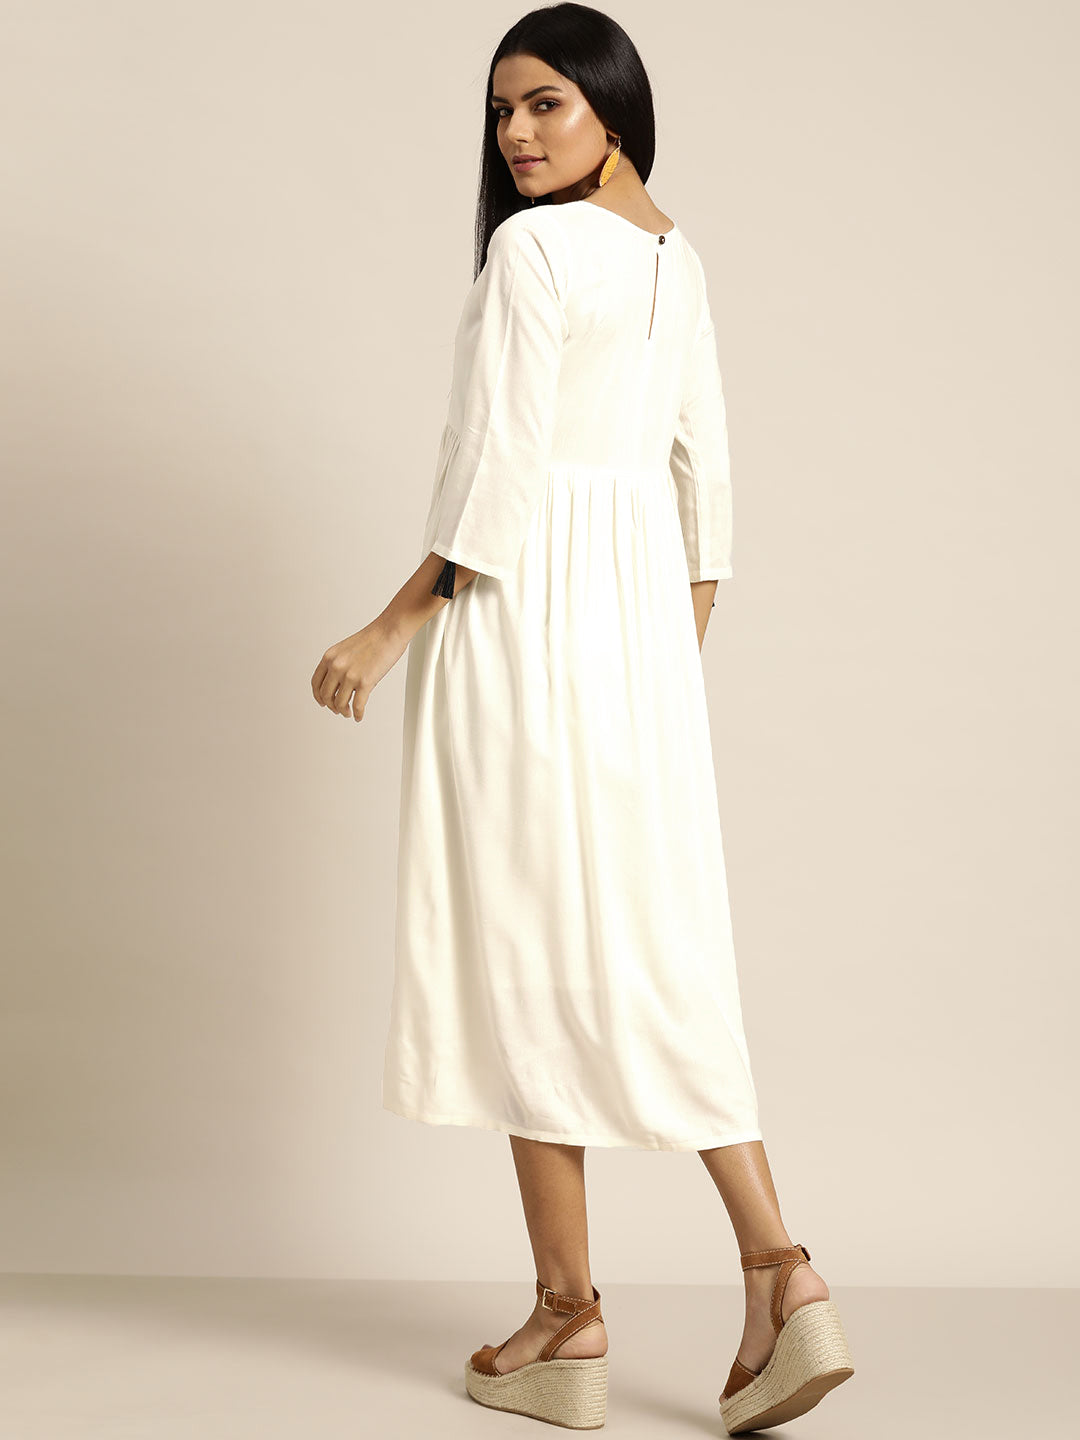 Off White Face Motif Embroidered Liva Dress